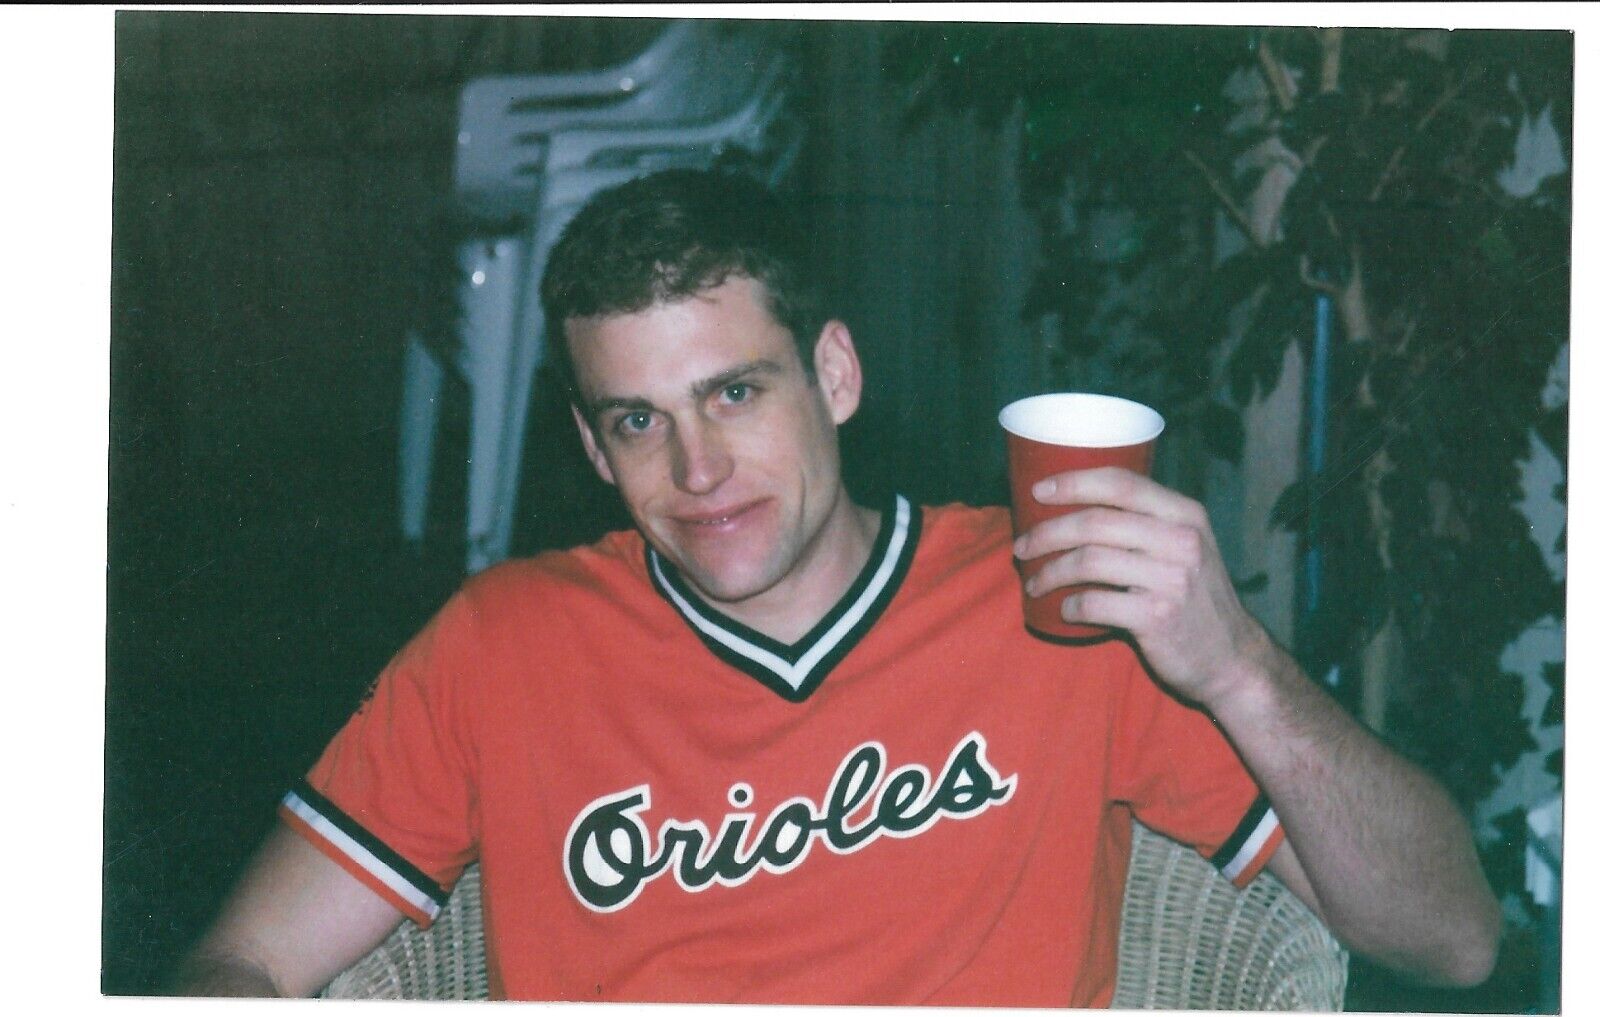 Hot Jock Man in Orioles Shirt Frat Boy Red Solo Cup 1990s Photo